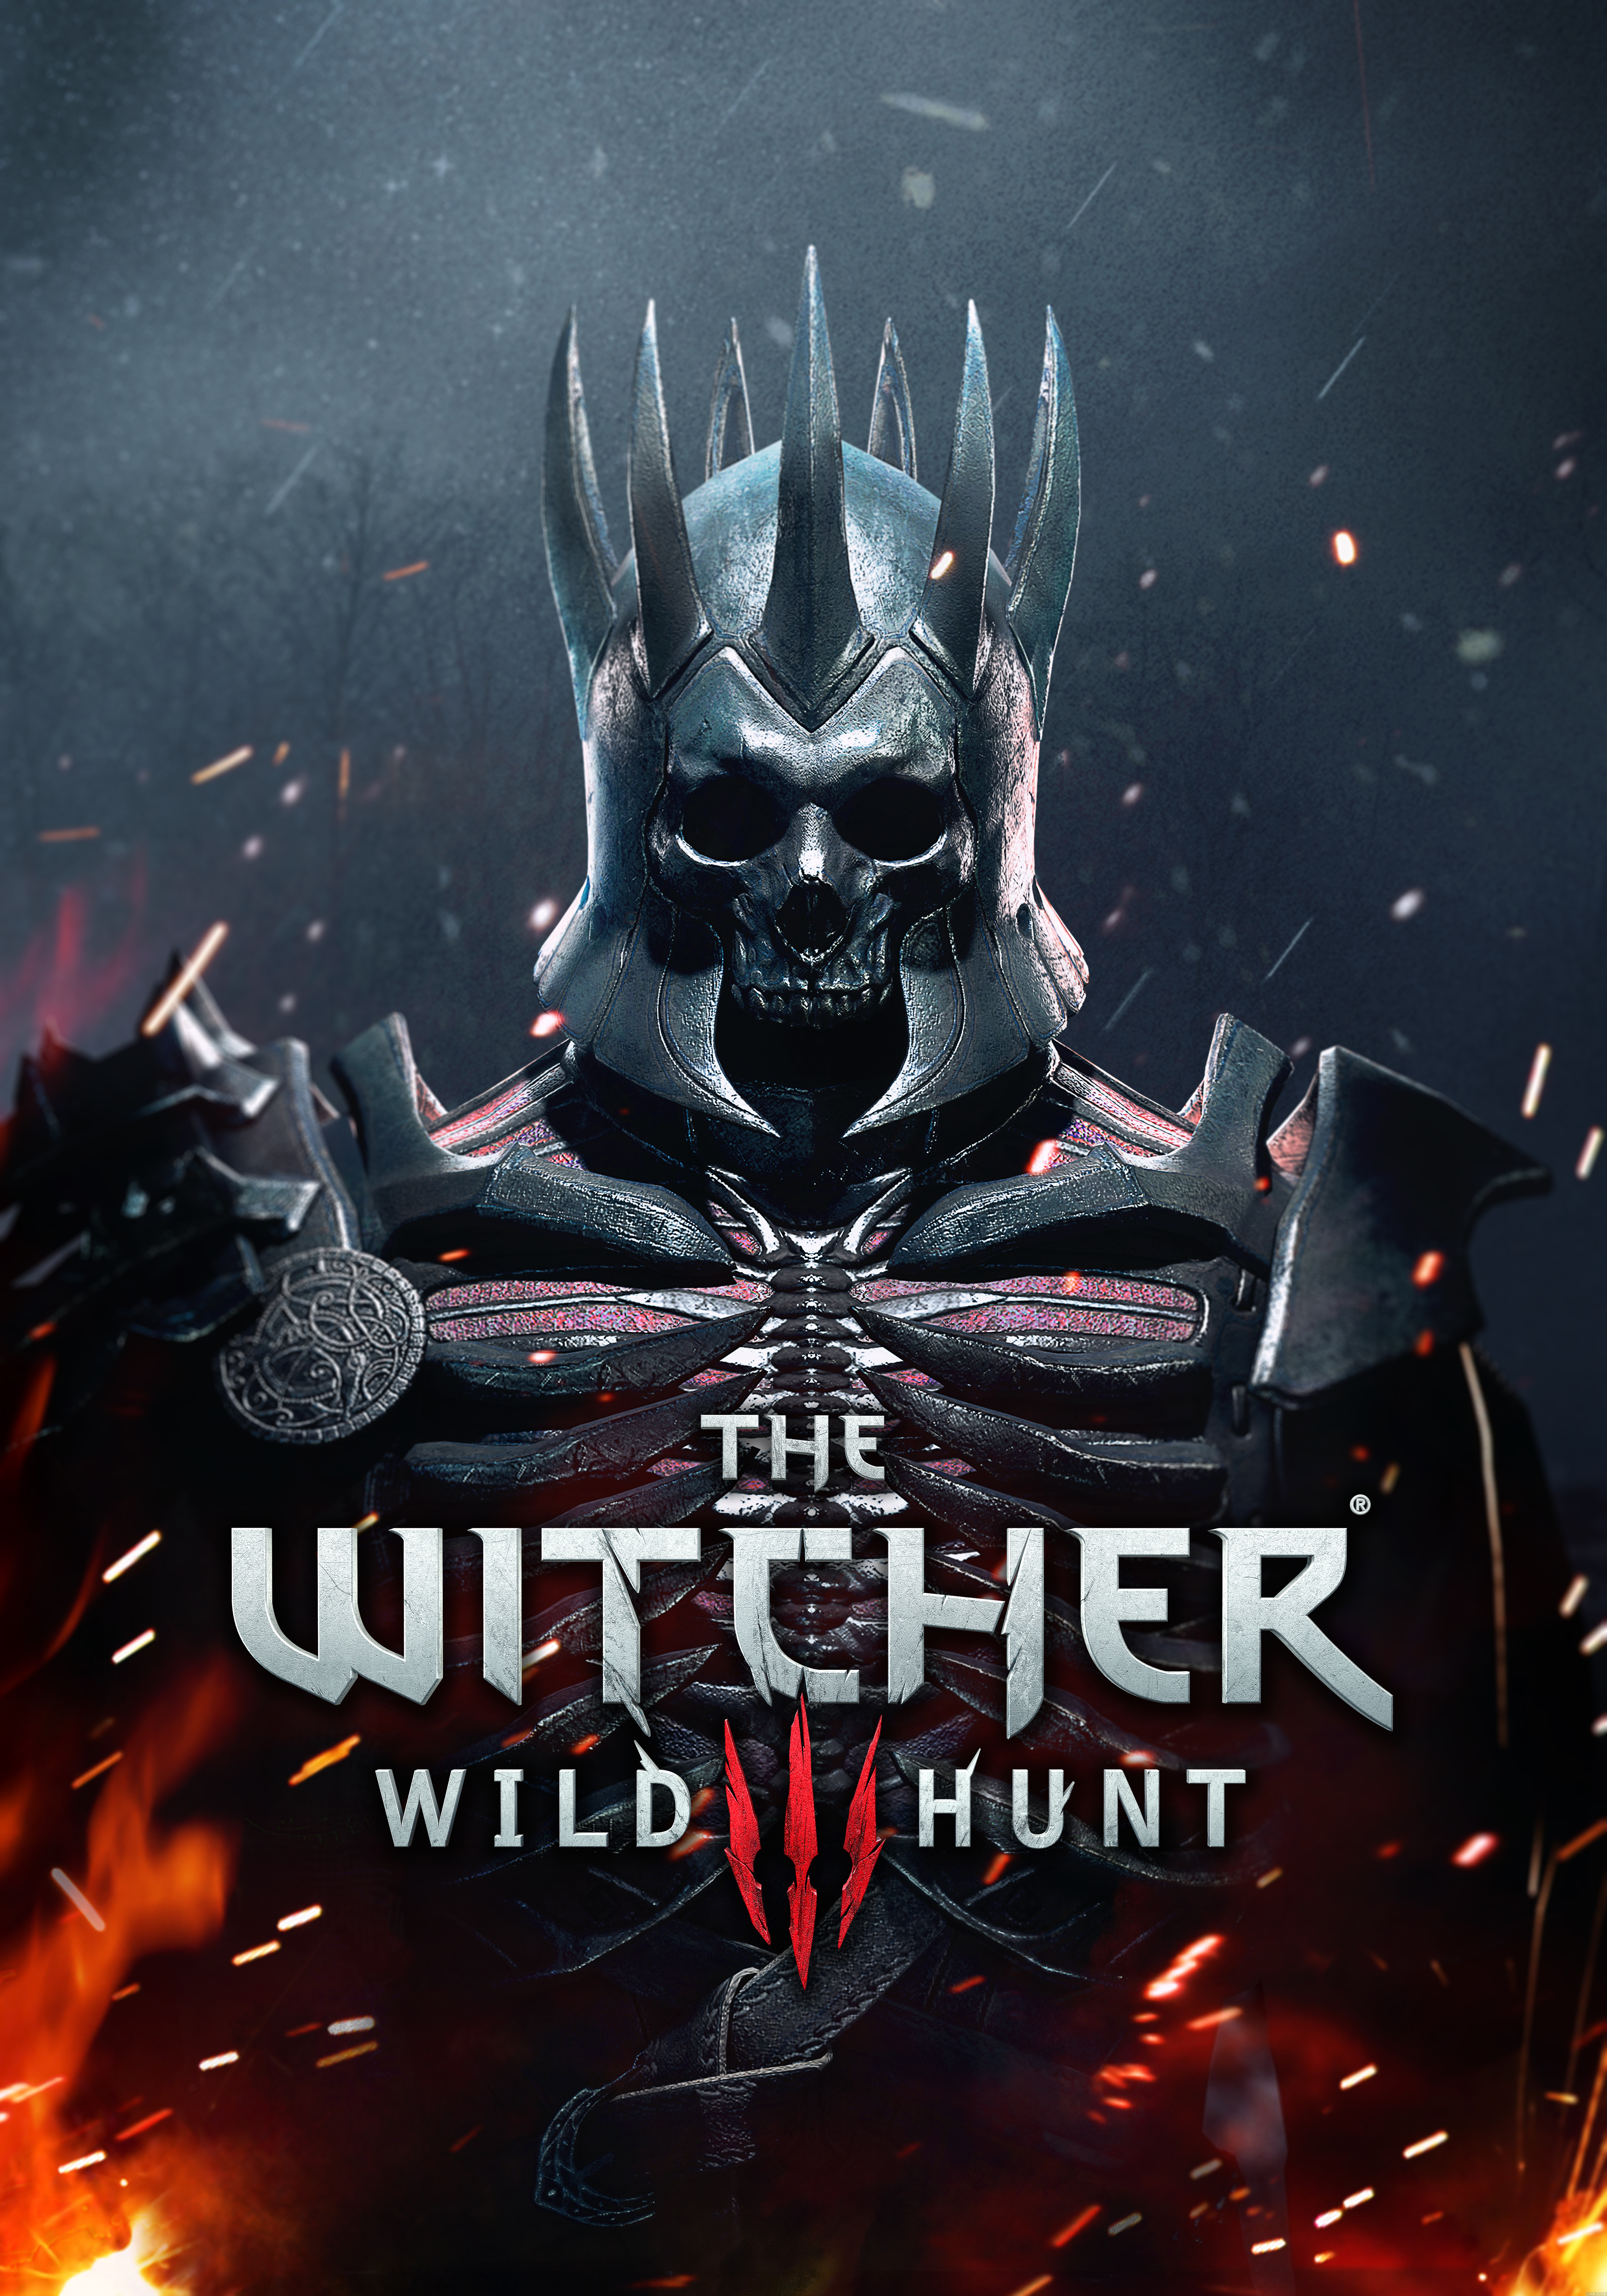 image_the_witcher_3_wild_hunt-25403-2651